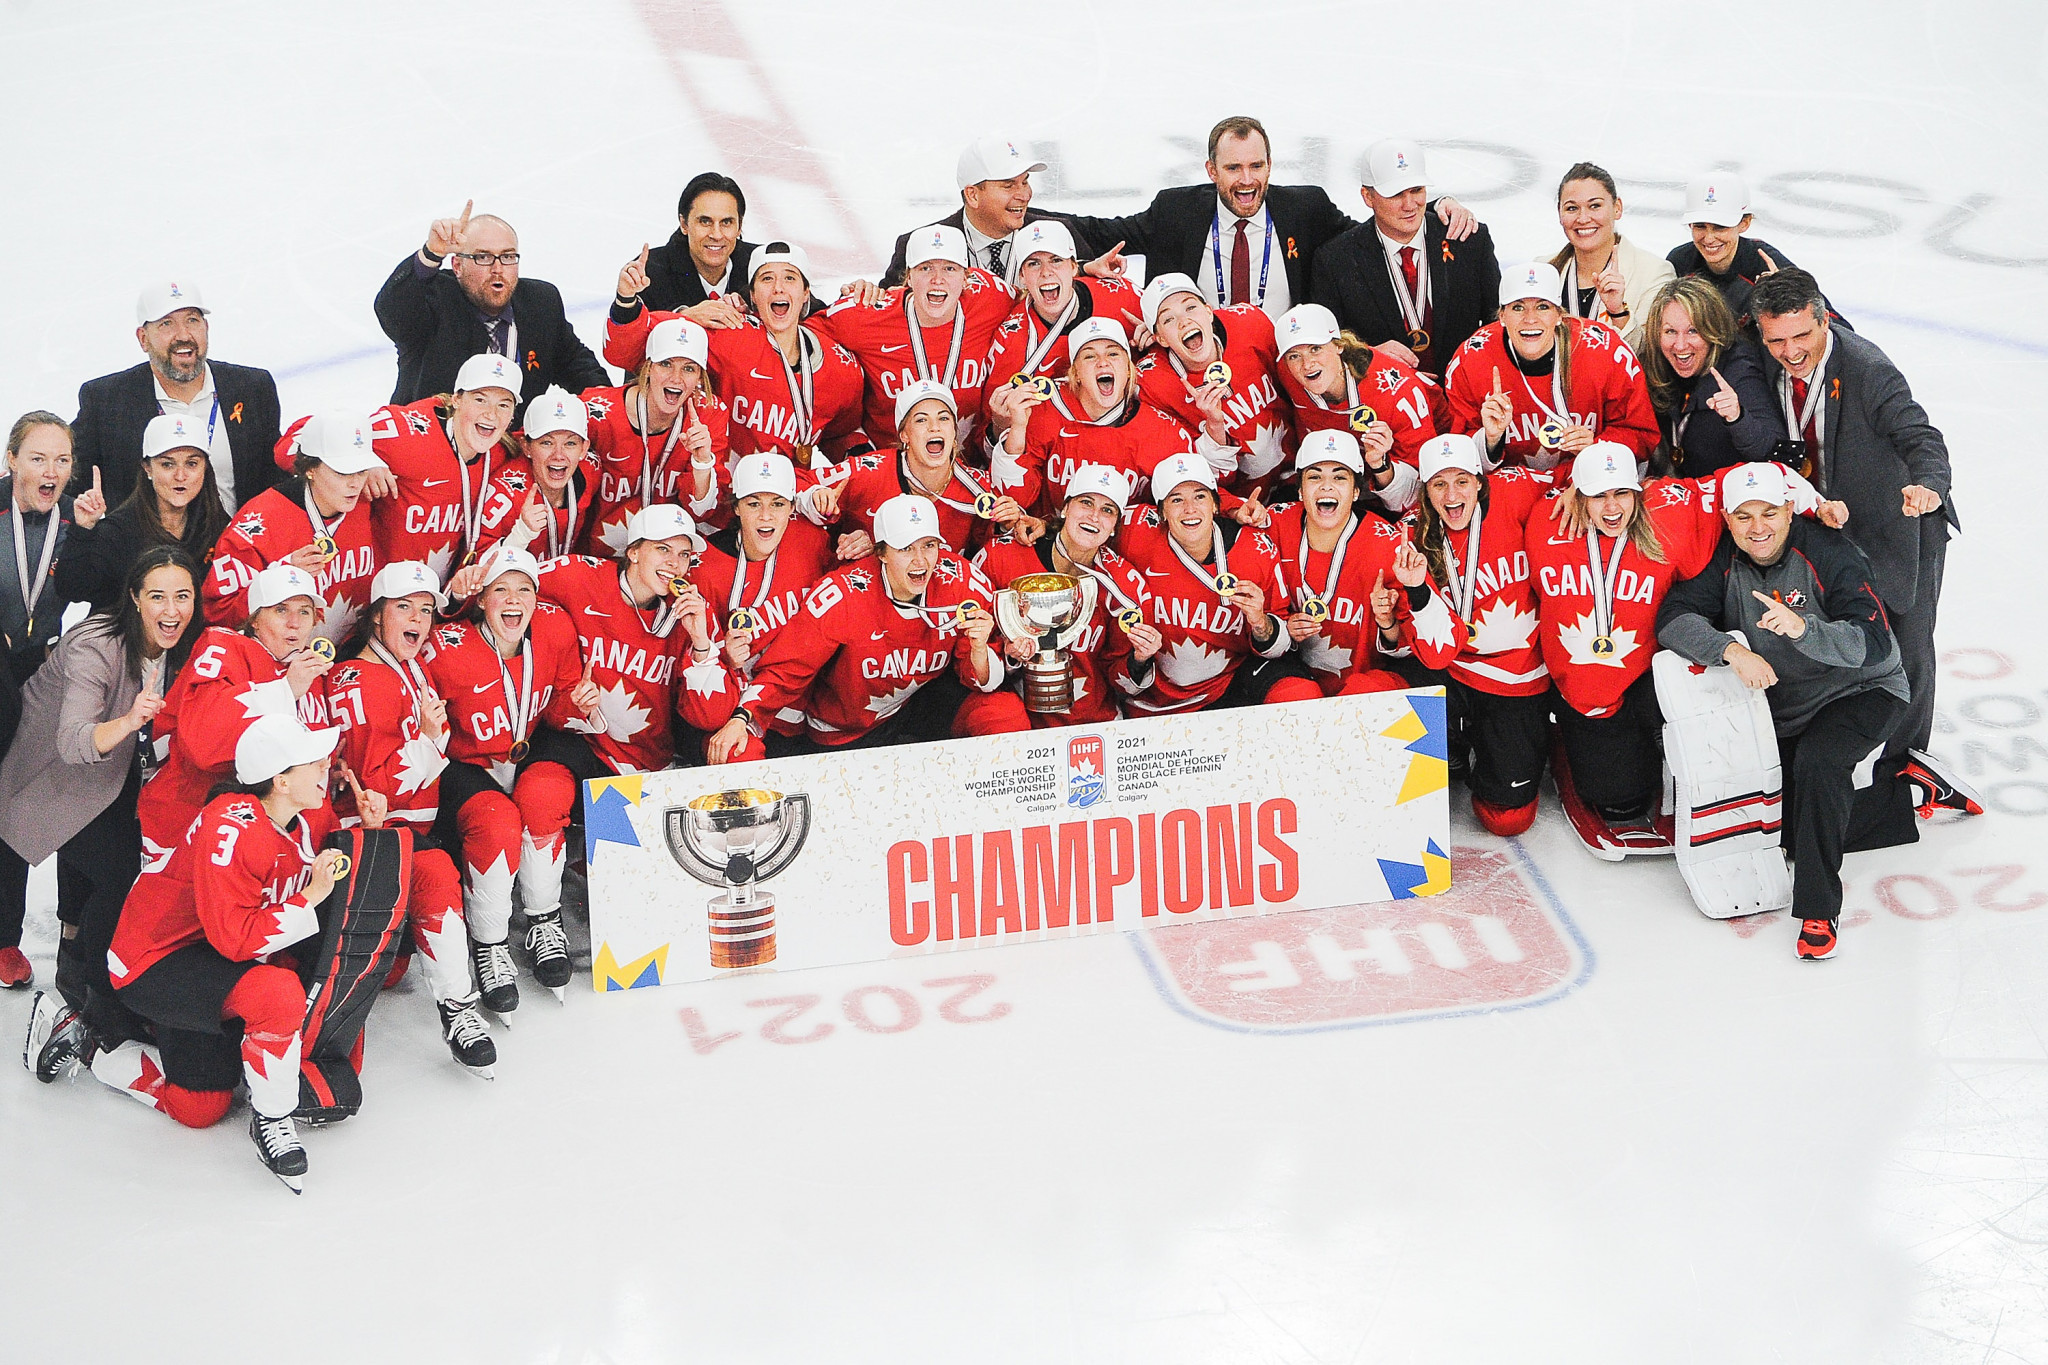 The IIHF World Championship is set to take place annually from 2022 onwards ©Getty Images